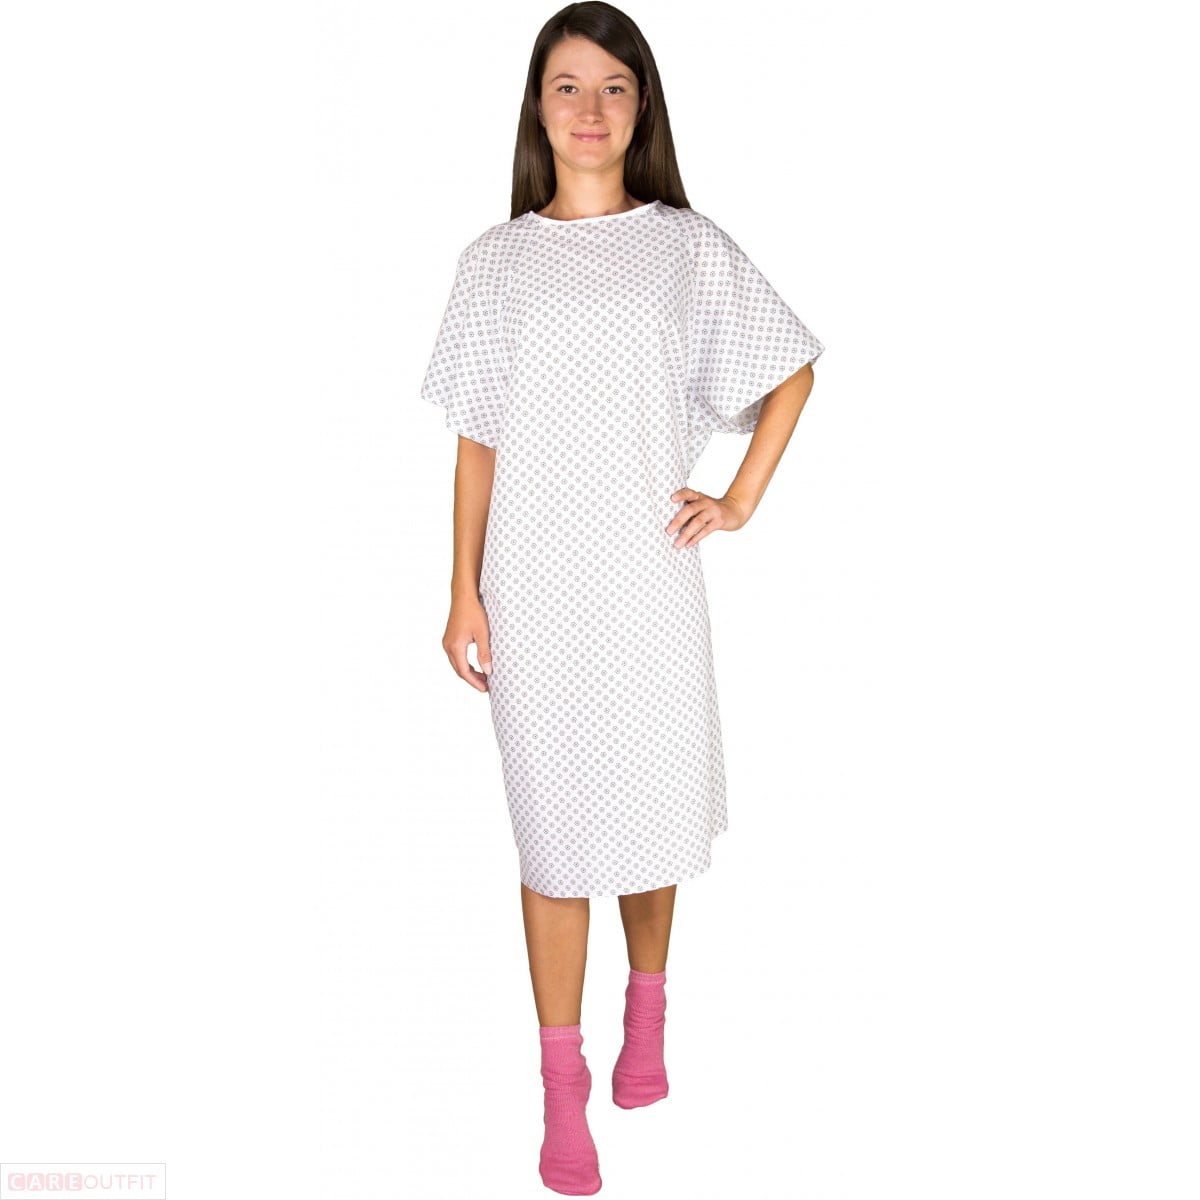 Children's Minnesota debuts hospital gowns that actually close